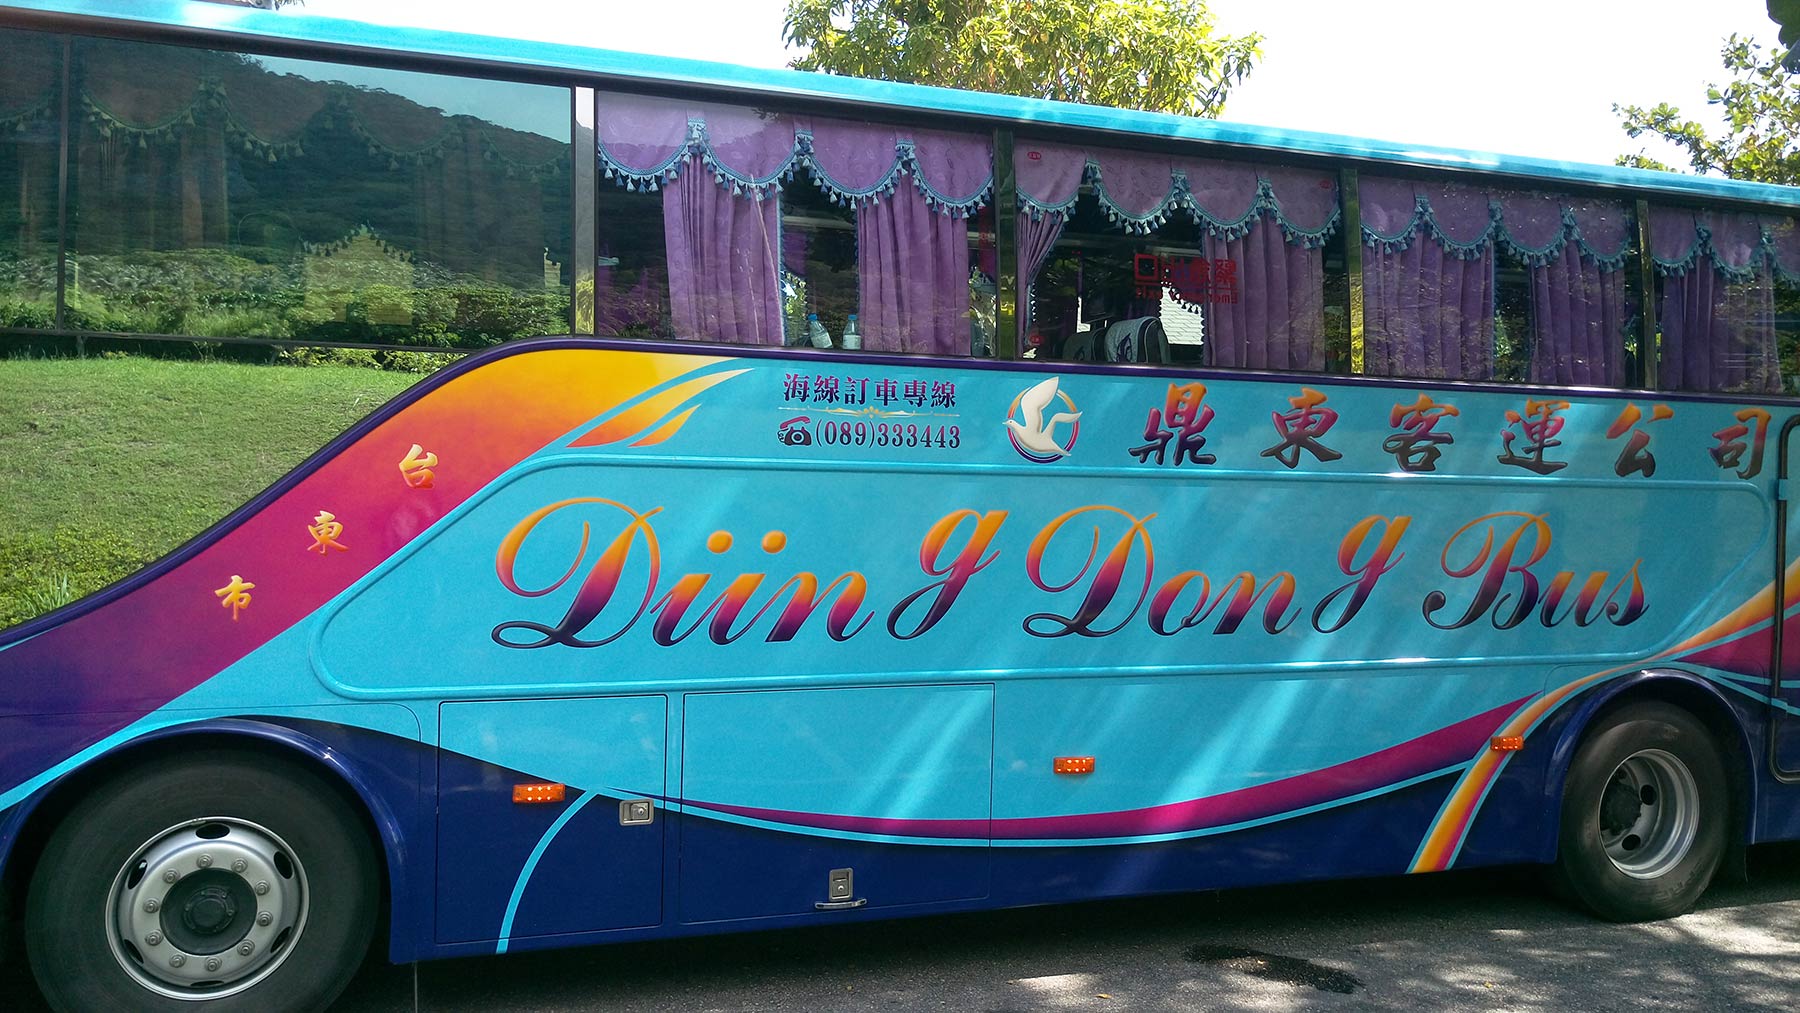 photo of a coach bus, with 'Diing Dong Bus' in large letters on the side, with the bottom of the descenders on the g's sitting on the baseline